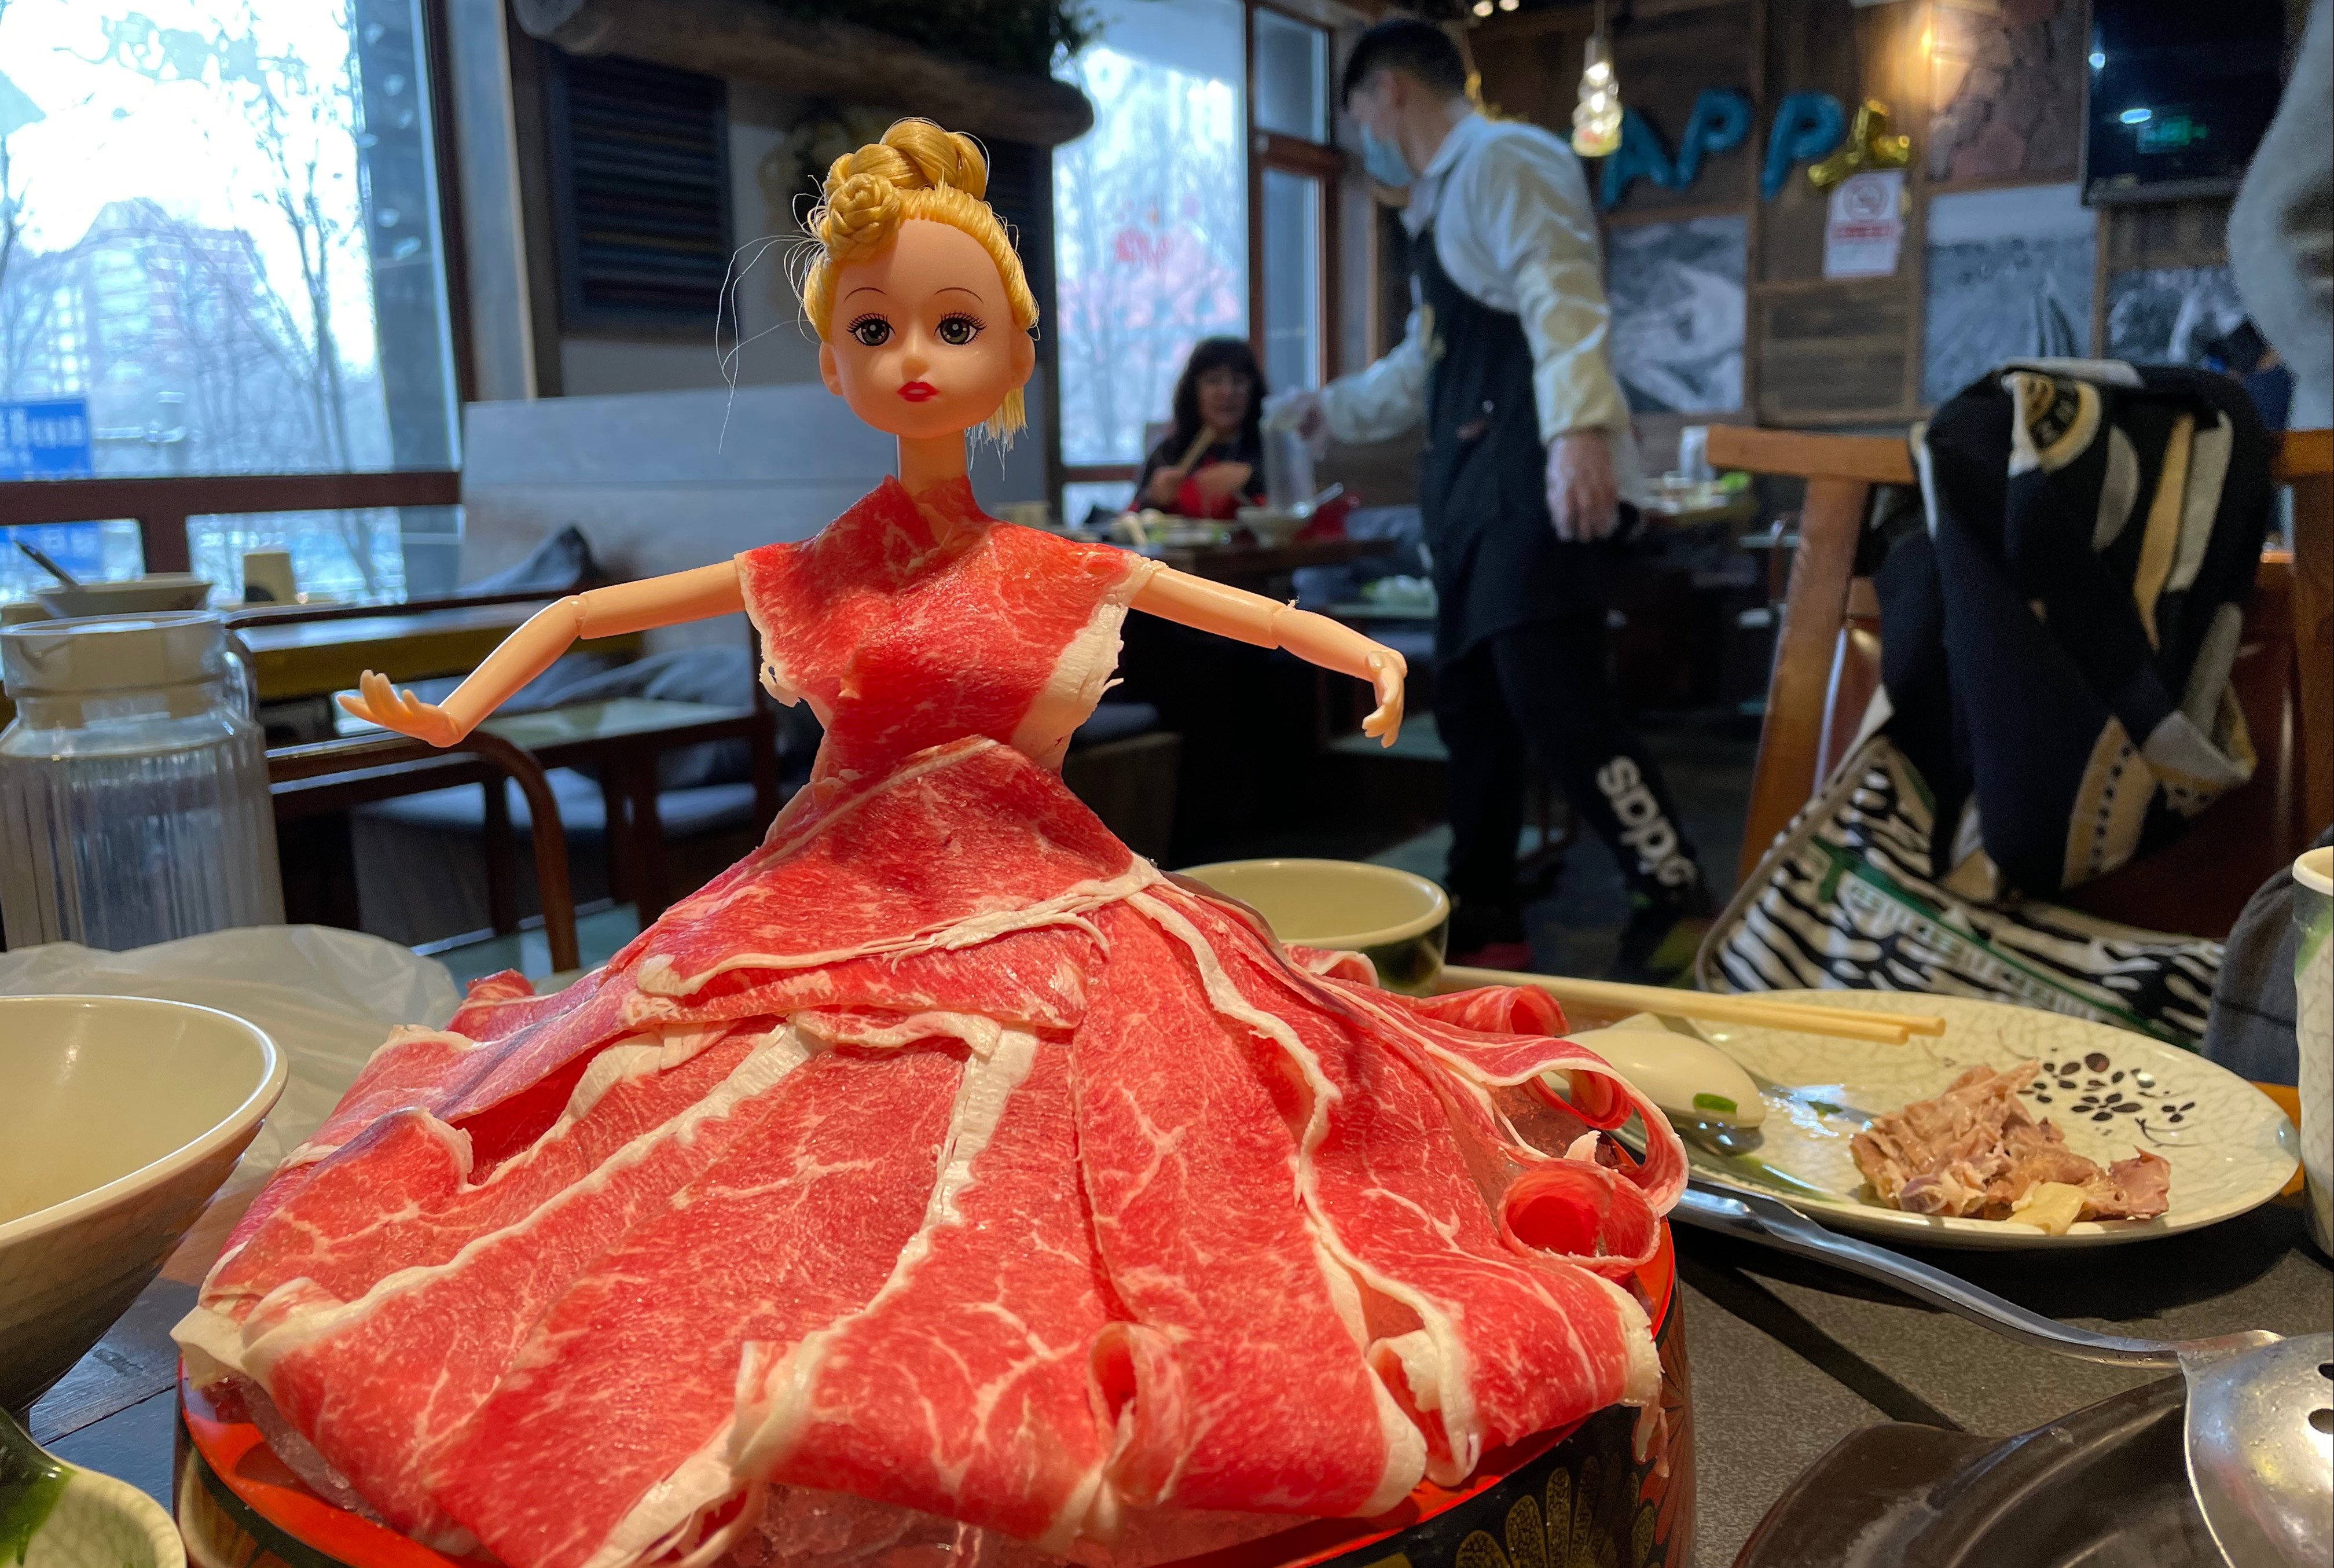 Beef slices form a doll’s dress at a hotpot restaurant in Beijing. Photo: Simon Song